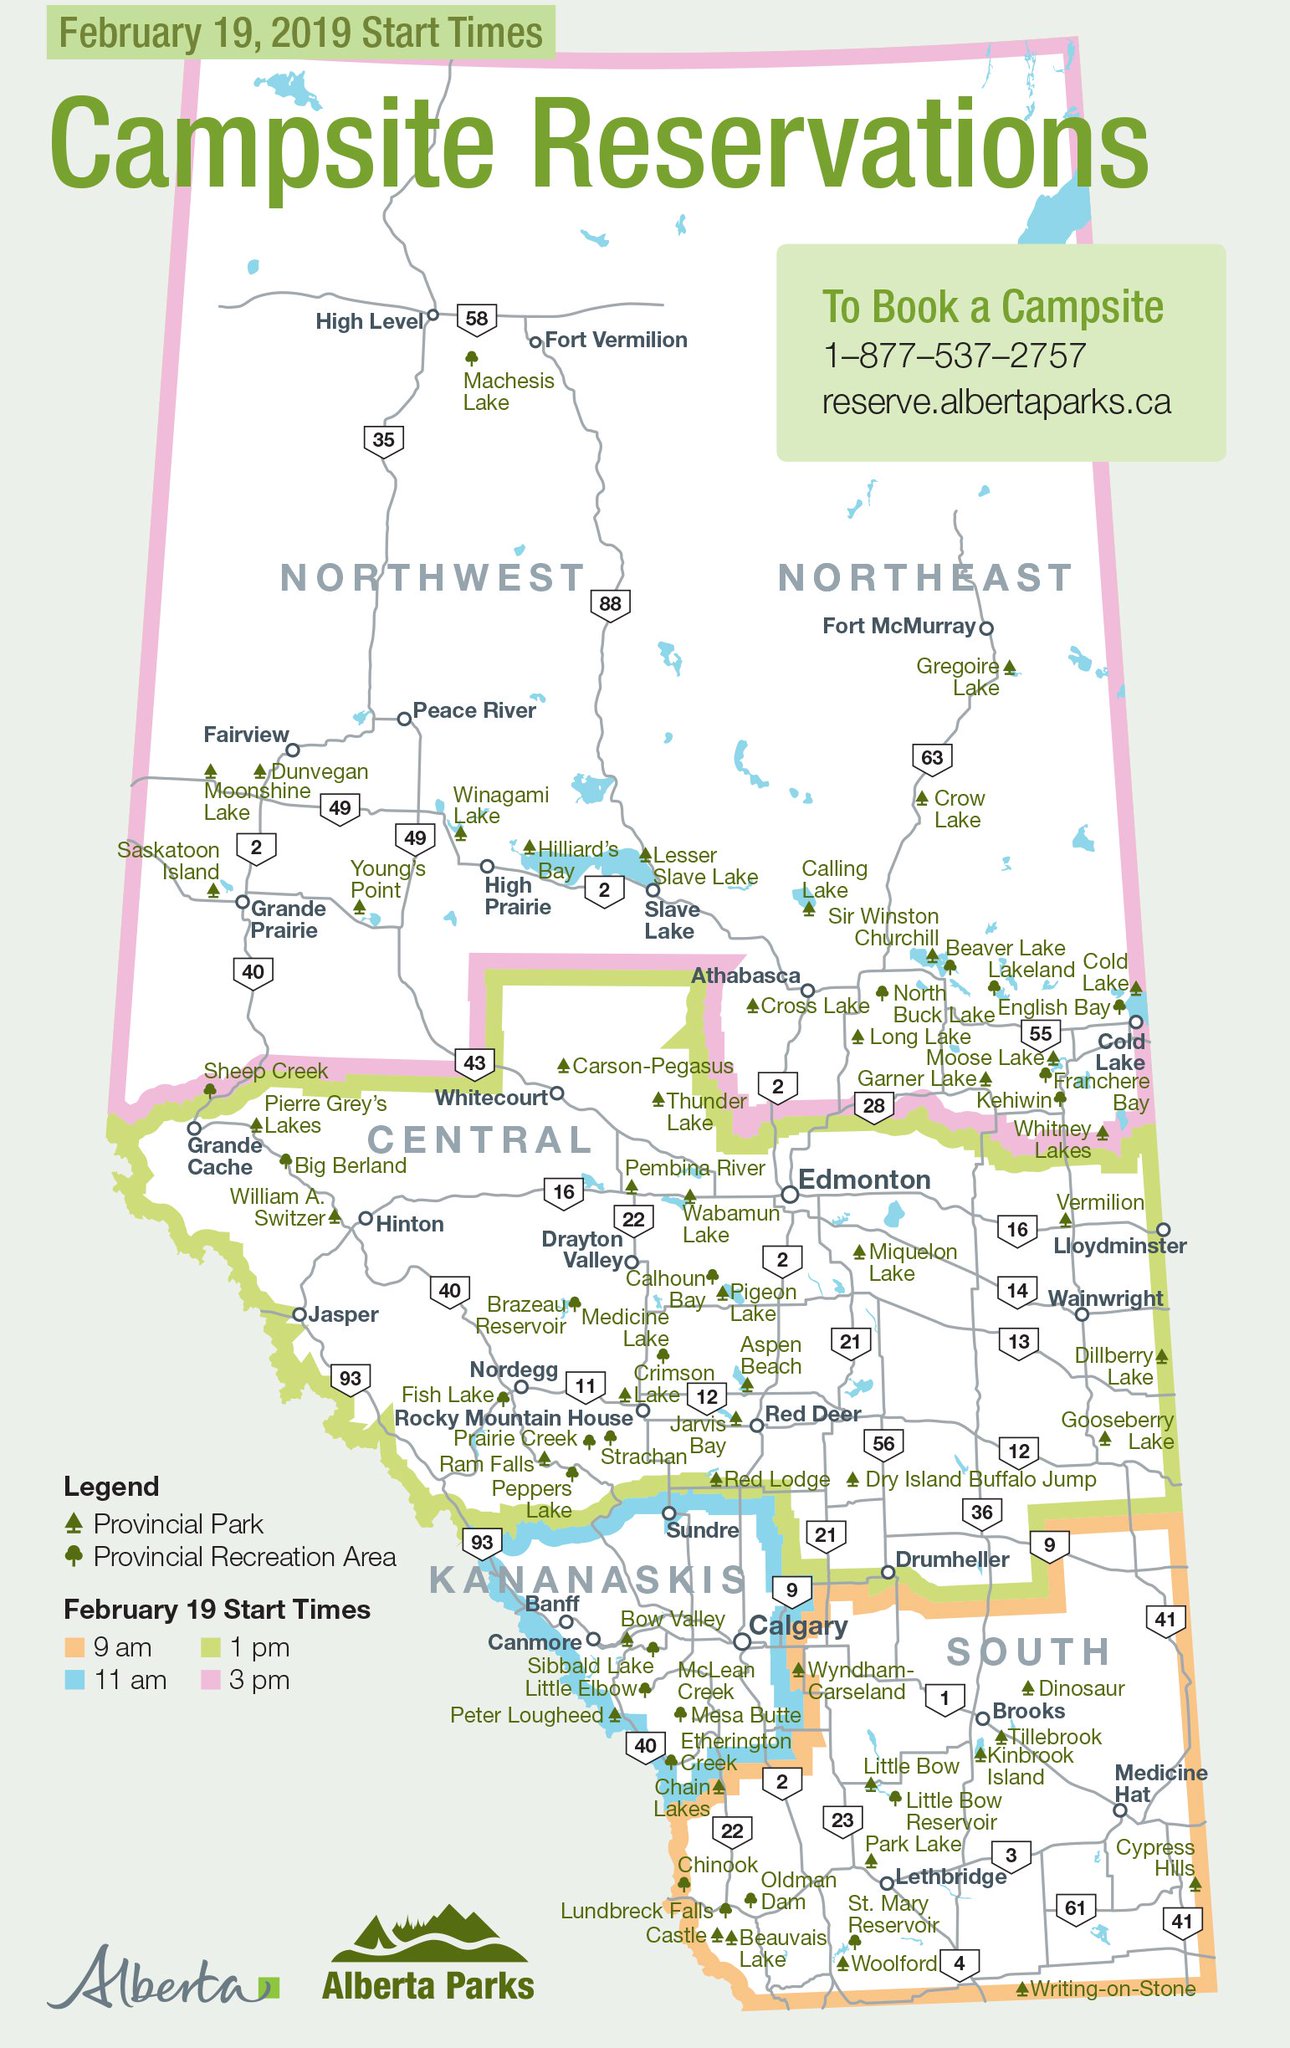 Alberta Parks On Twitter Individual Camping Reservations Begin Today At 9 A M With Launch Times Staggered By Region Launch Times Are Based On The Region The Campsite Is In Not The Region